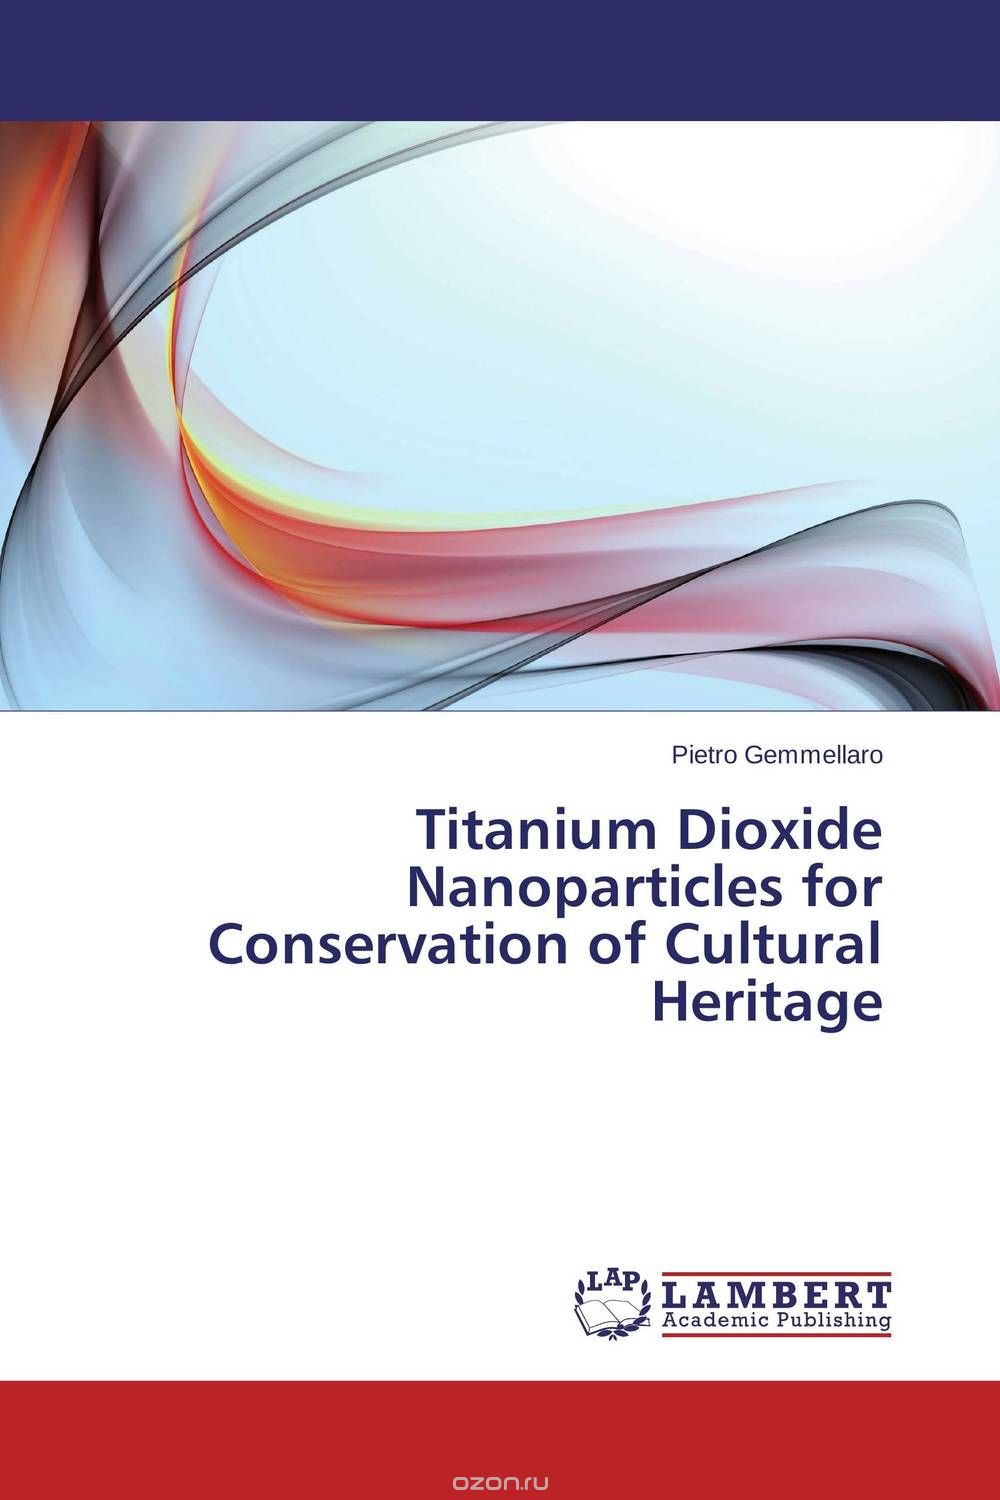 Titanium Dioxide Nanoparticles for Conservation of Cultural Heritage